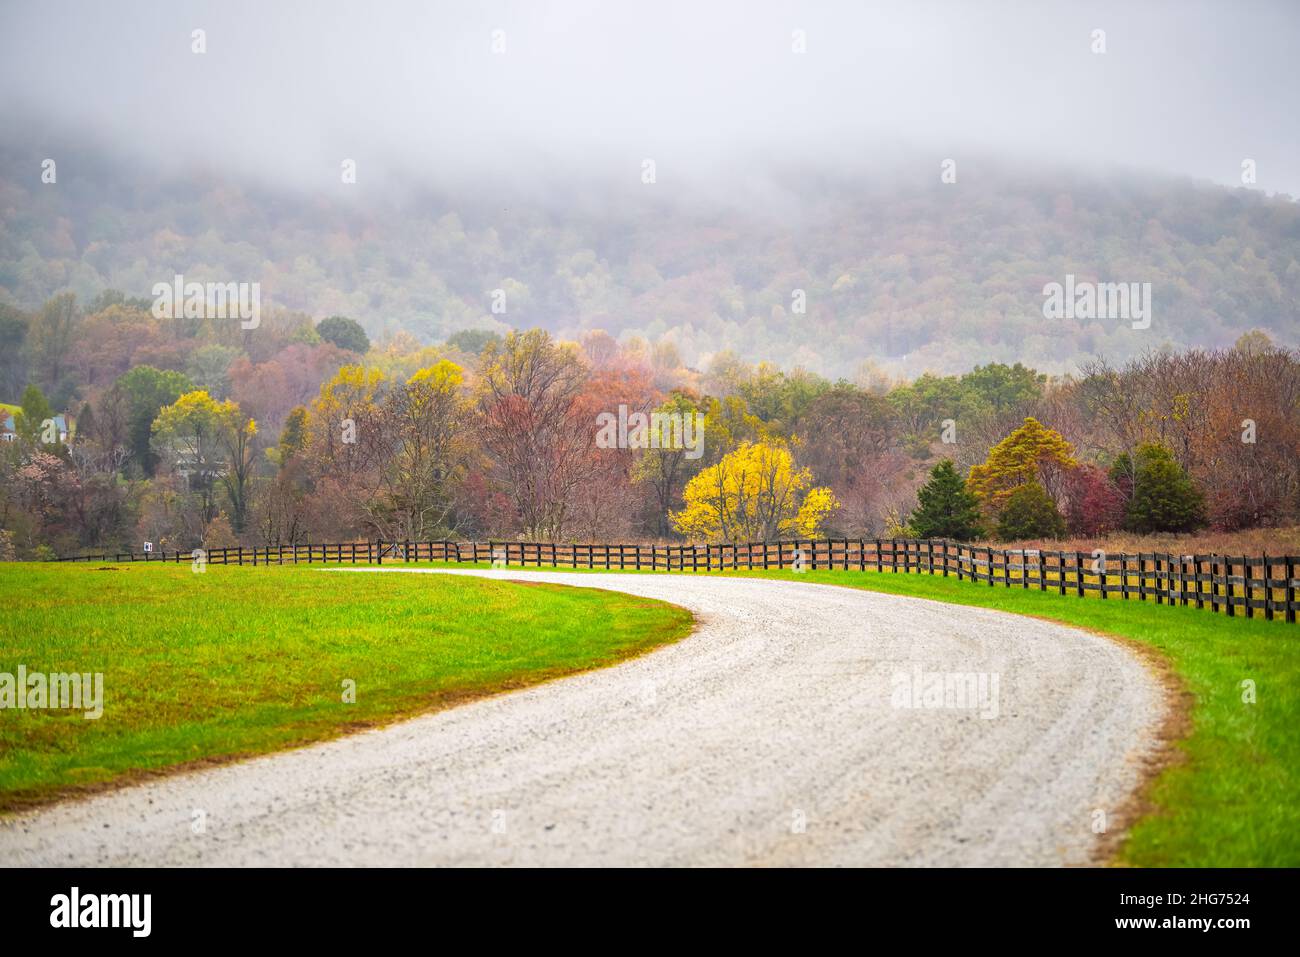 Farm curve dirt road picket fence in rural Virginia near Blue Ridge parkway mountains in autumn fall foliage season with idyllic landscape countryside Stock Photo